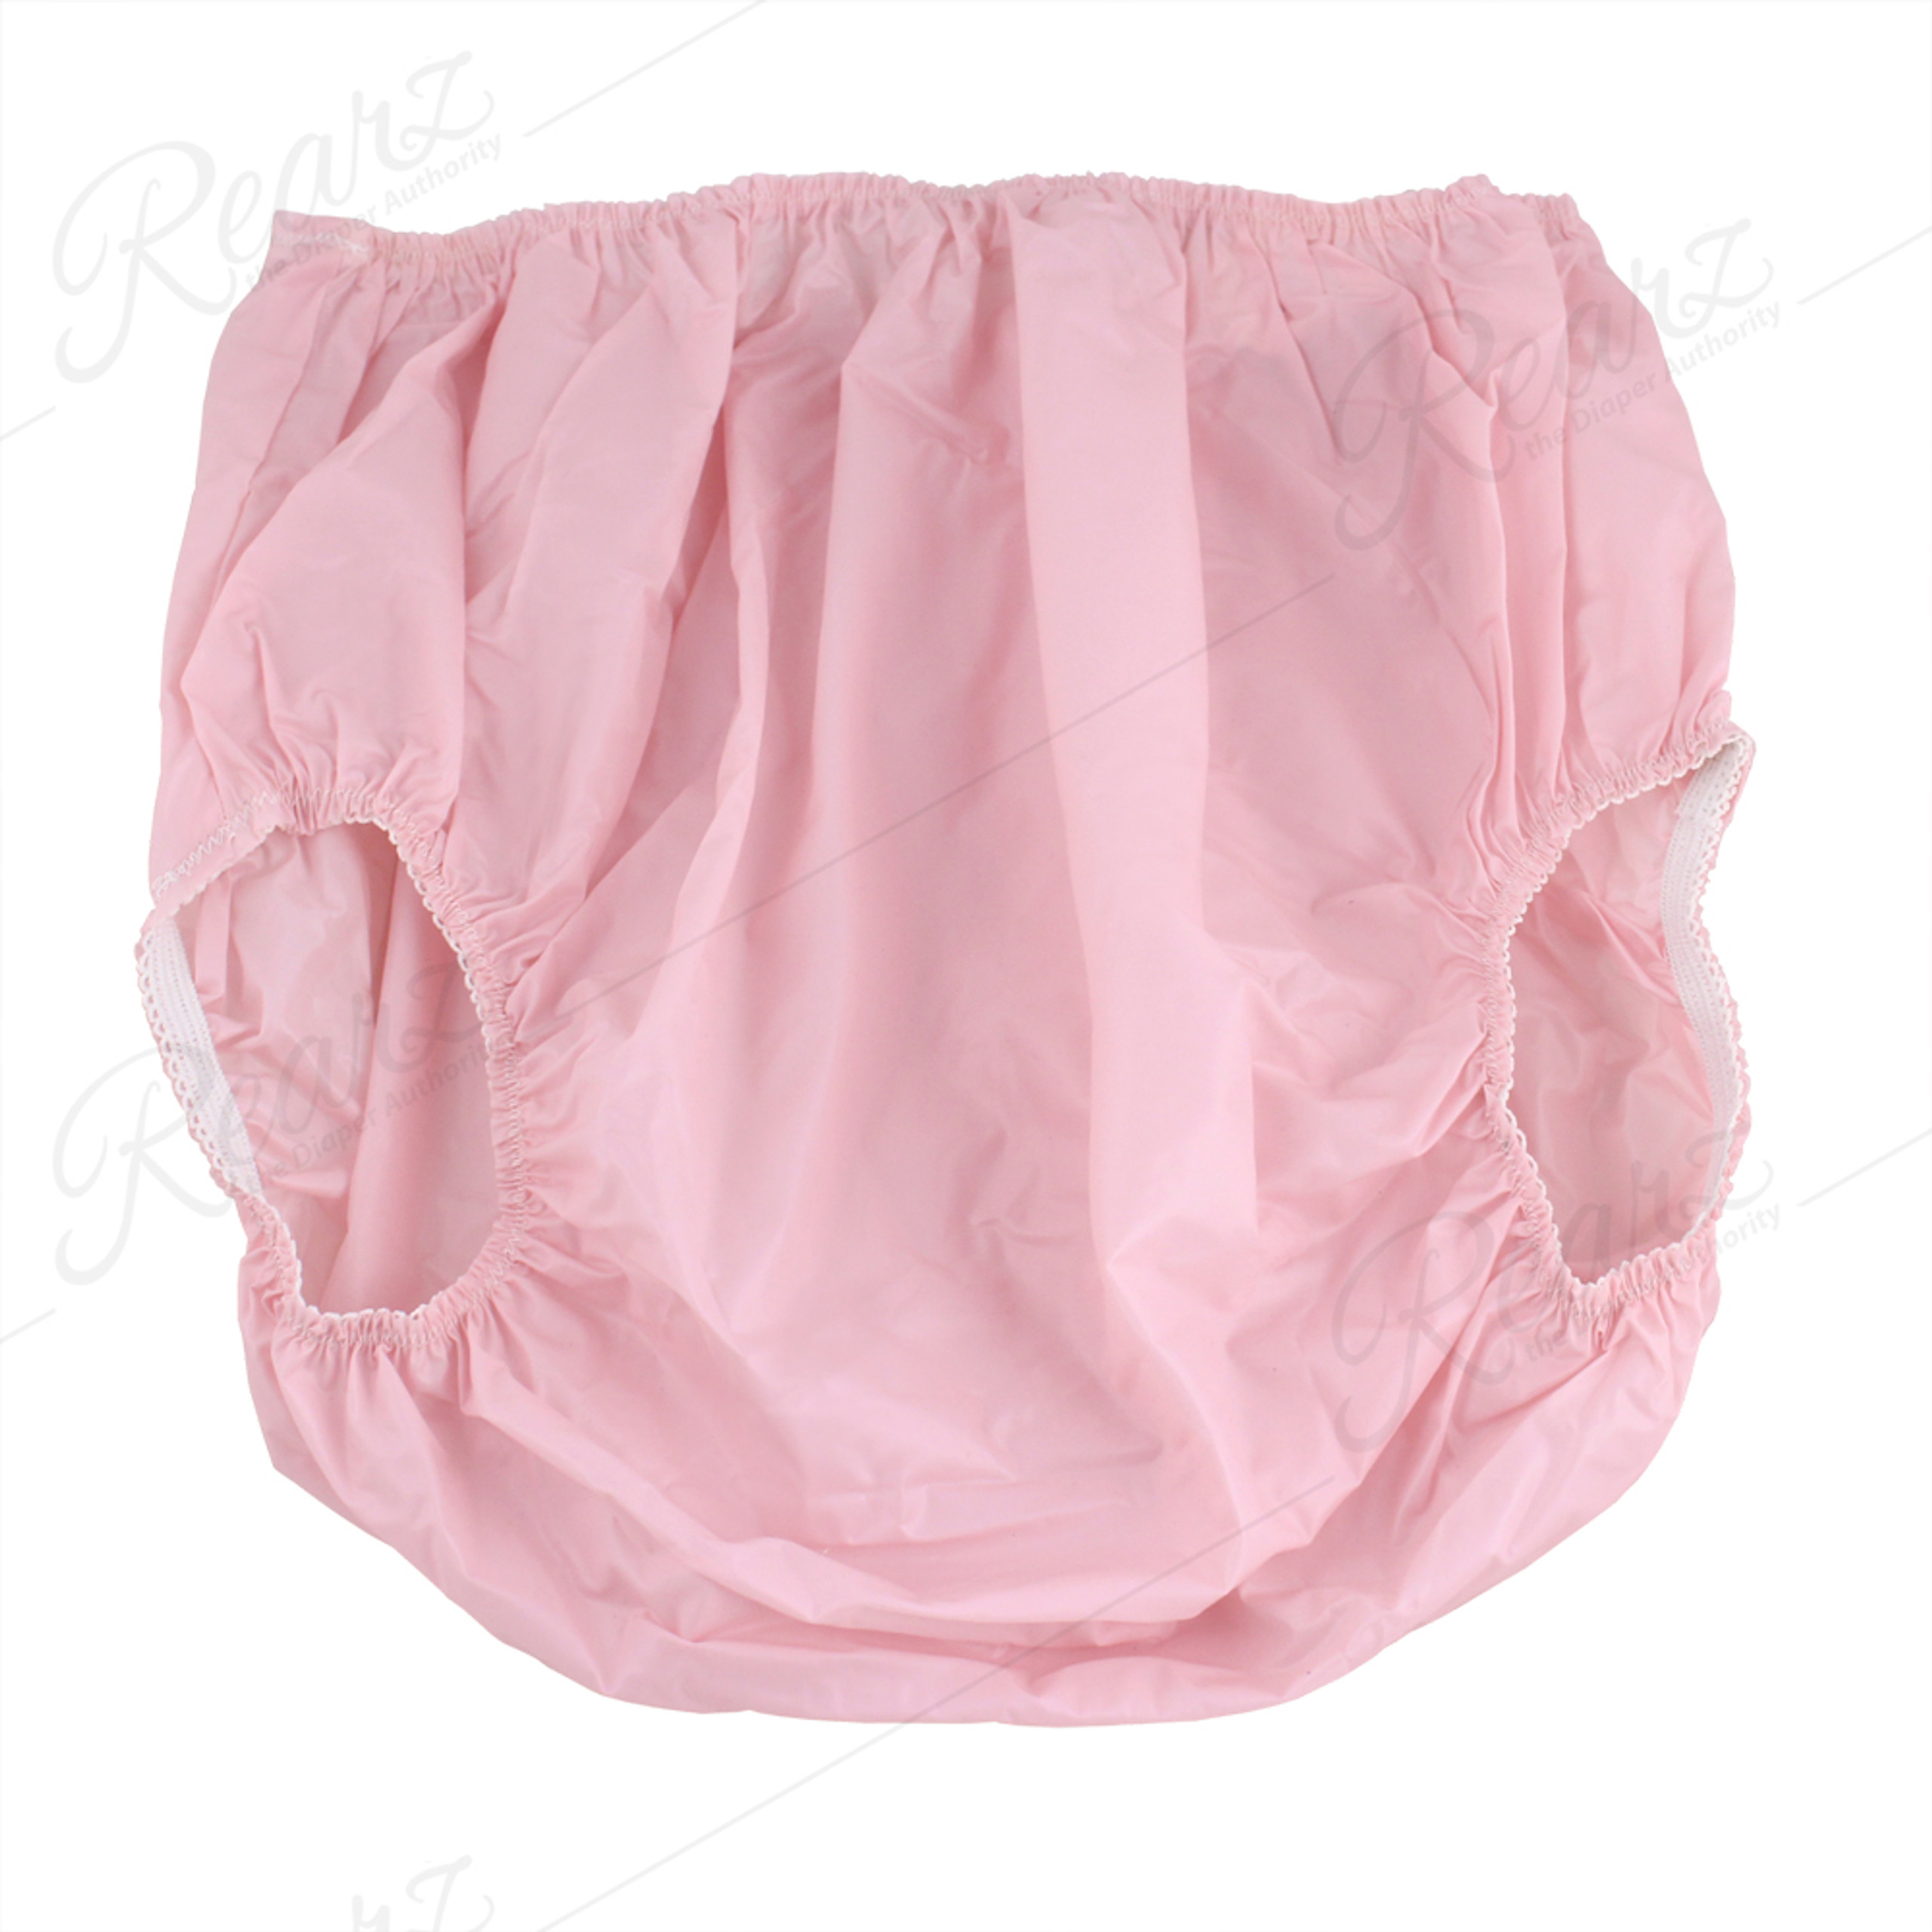 Extra Roomy Nighttime Plastic Pants - Incontrol Diapers